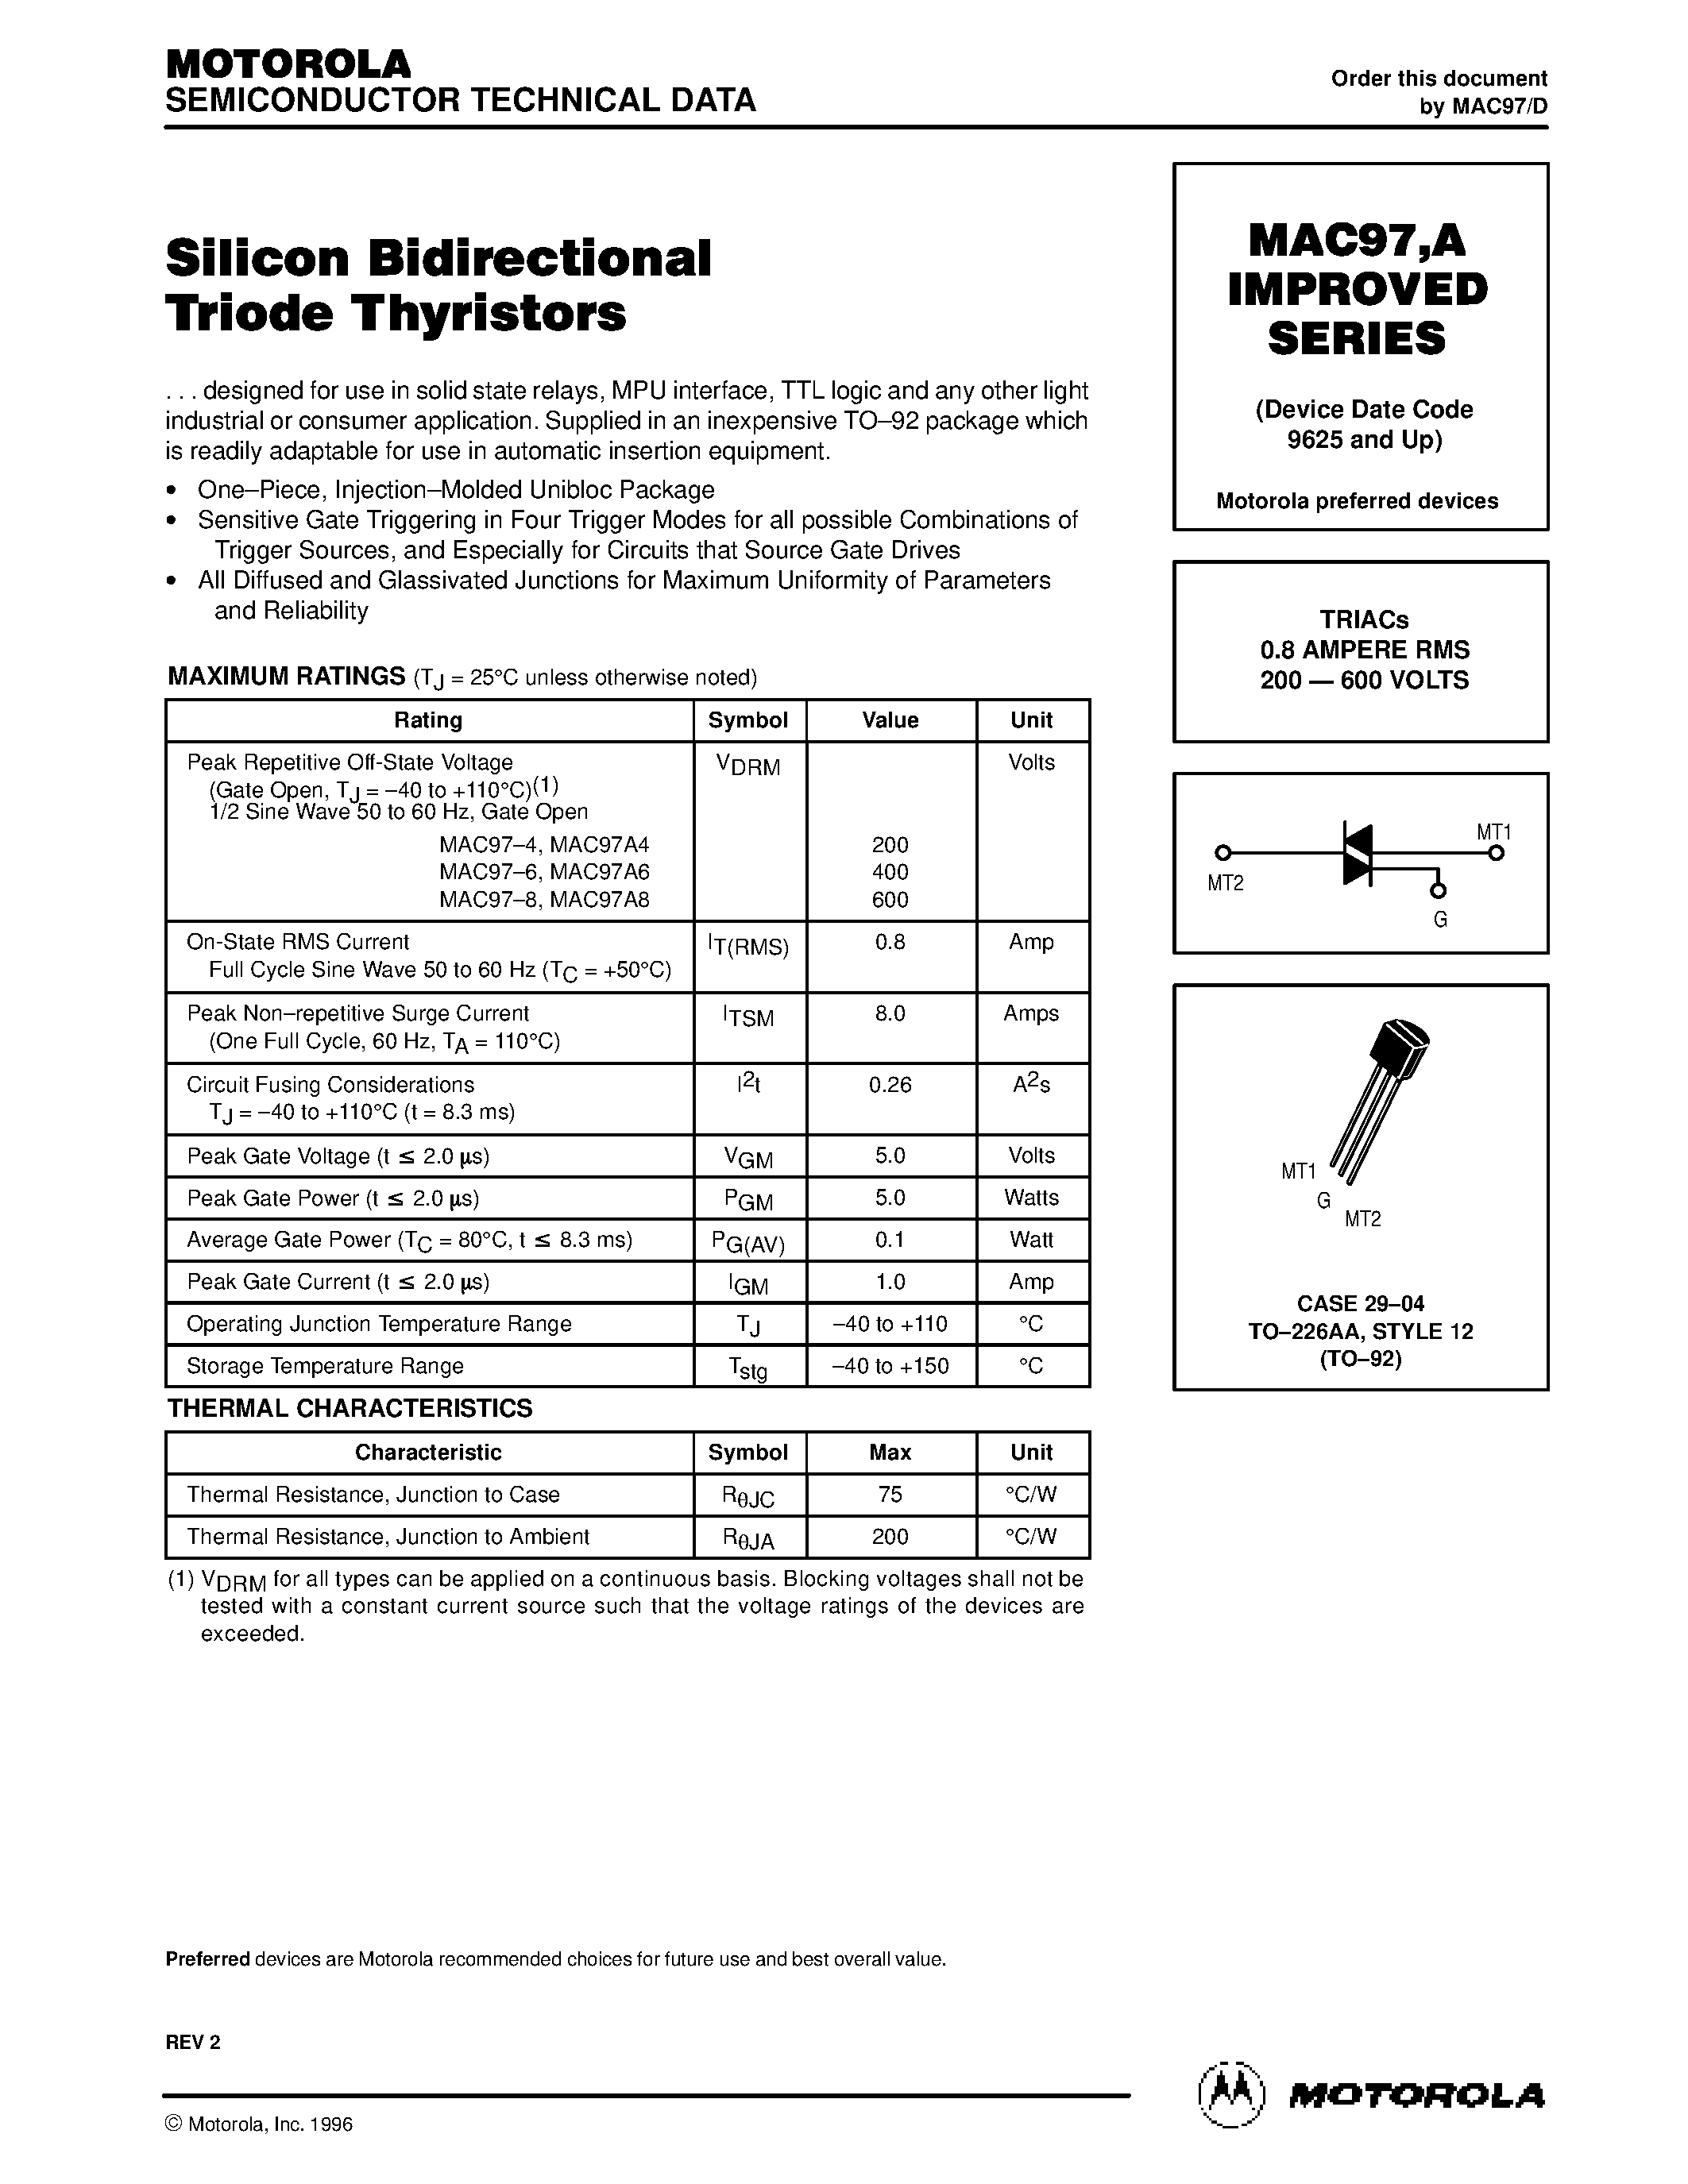 Datasheet MAC97-8 - TRIACs 0.8 AMPERE RMS 200 - 600 VOLTS page 1